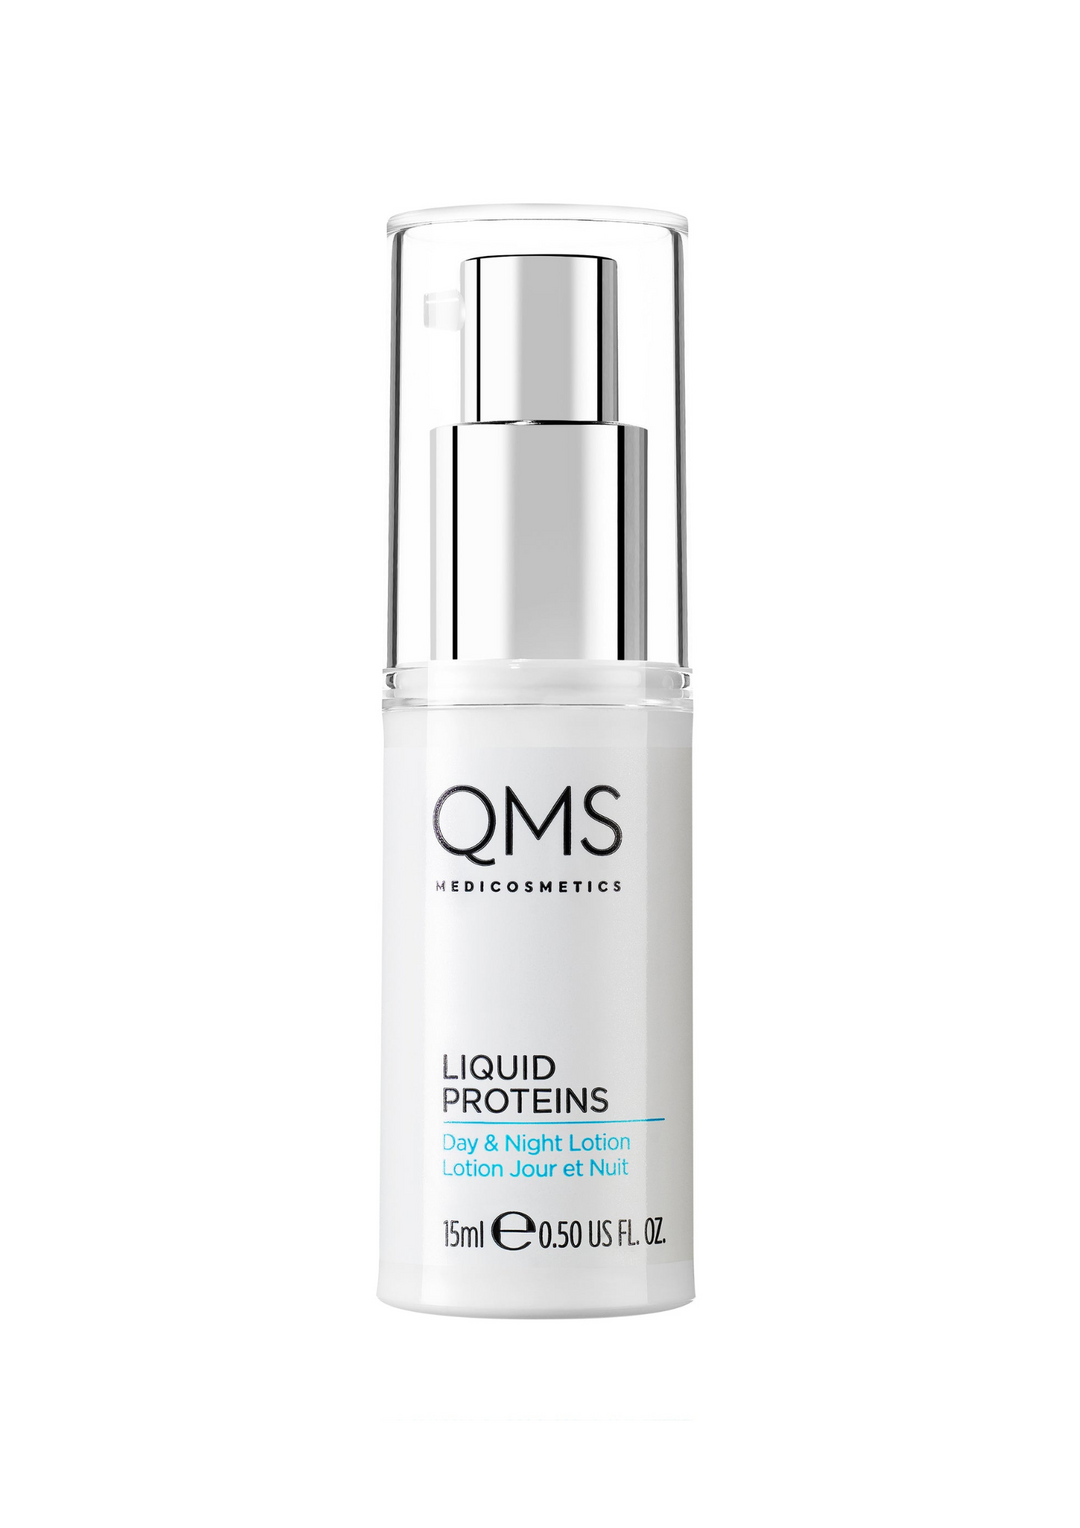 Liquid Proteins Day & Night Lotion 15 ml (discover size)